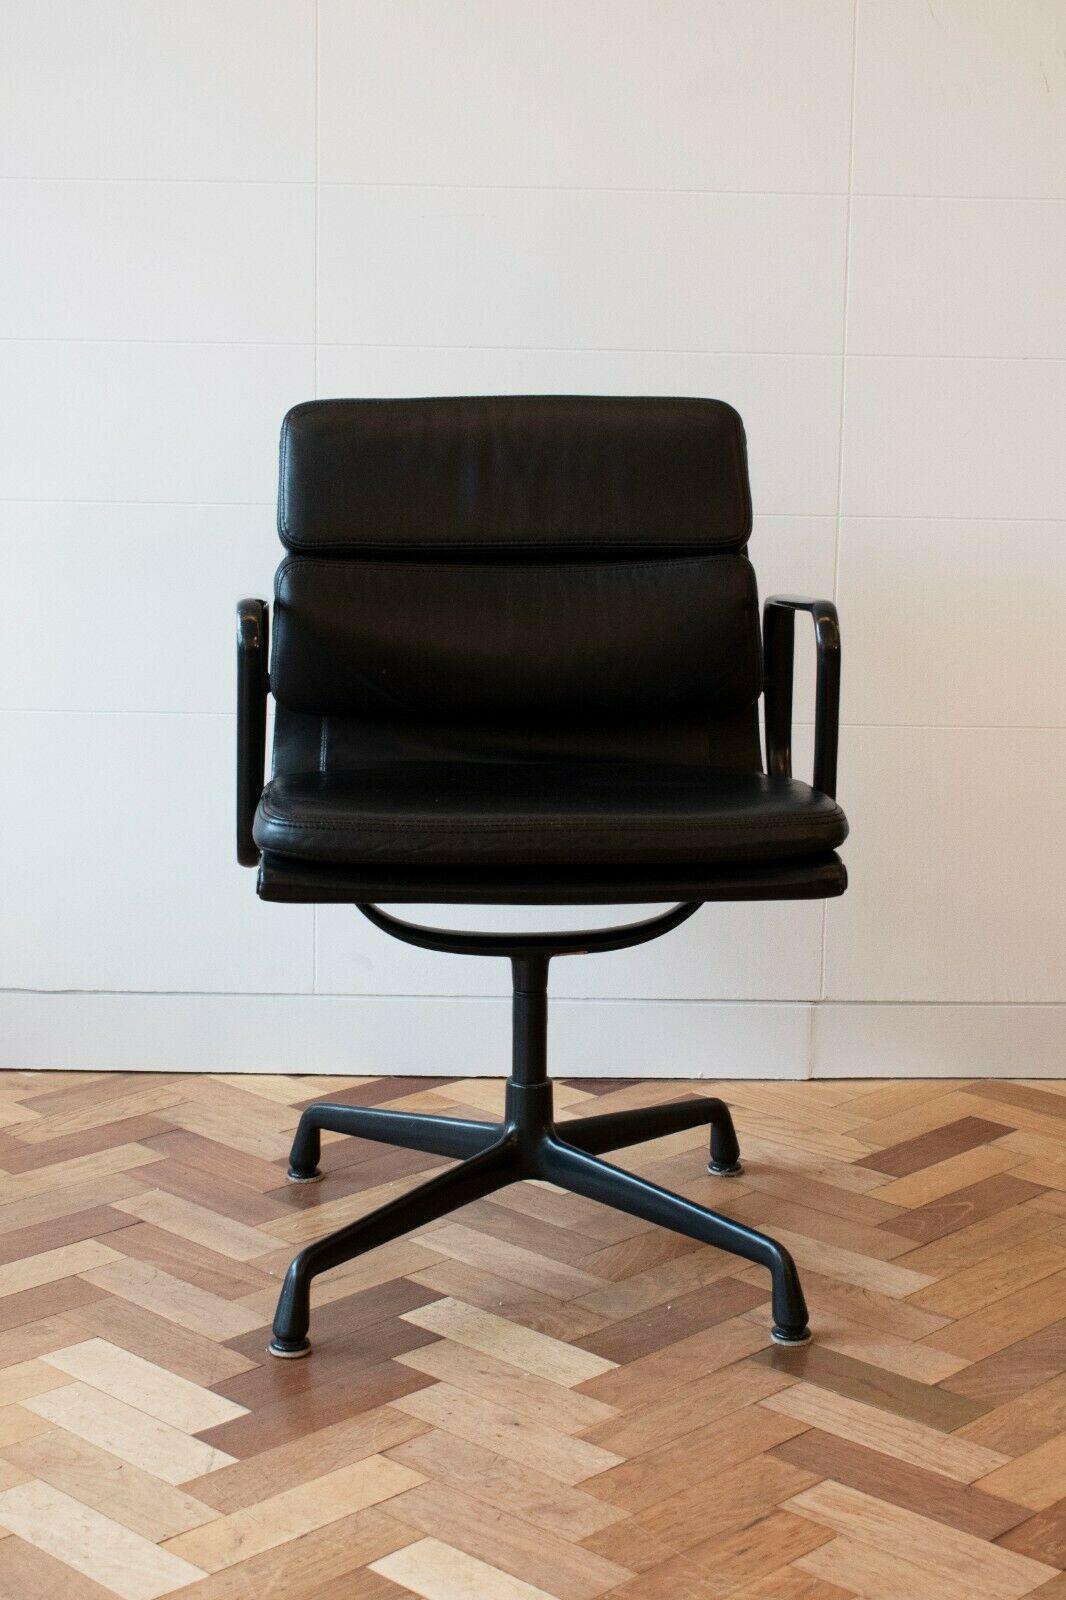 Eames EA208 soft pad office chair for Vitra c.1980s/1990s.

This a stylish and iconic office chair is in its original soft padded leather upholstery set upon a black coated aluminium frame. The chair features a swivel mechanism 
however they at a